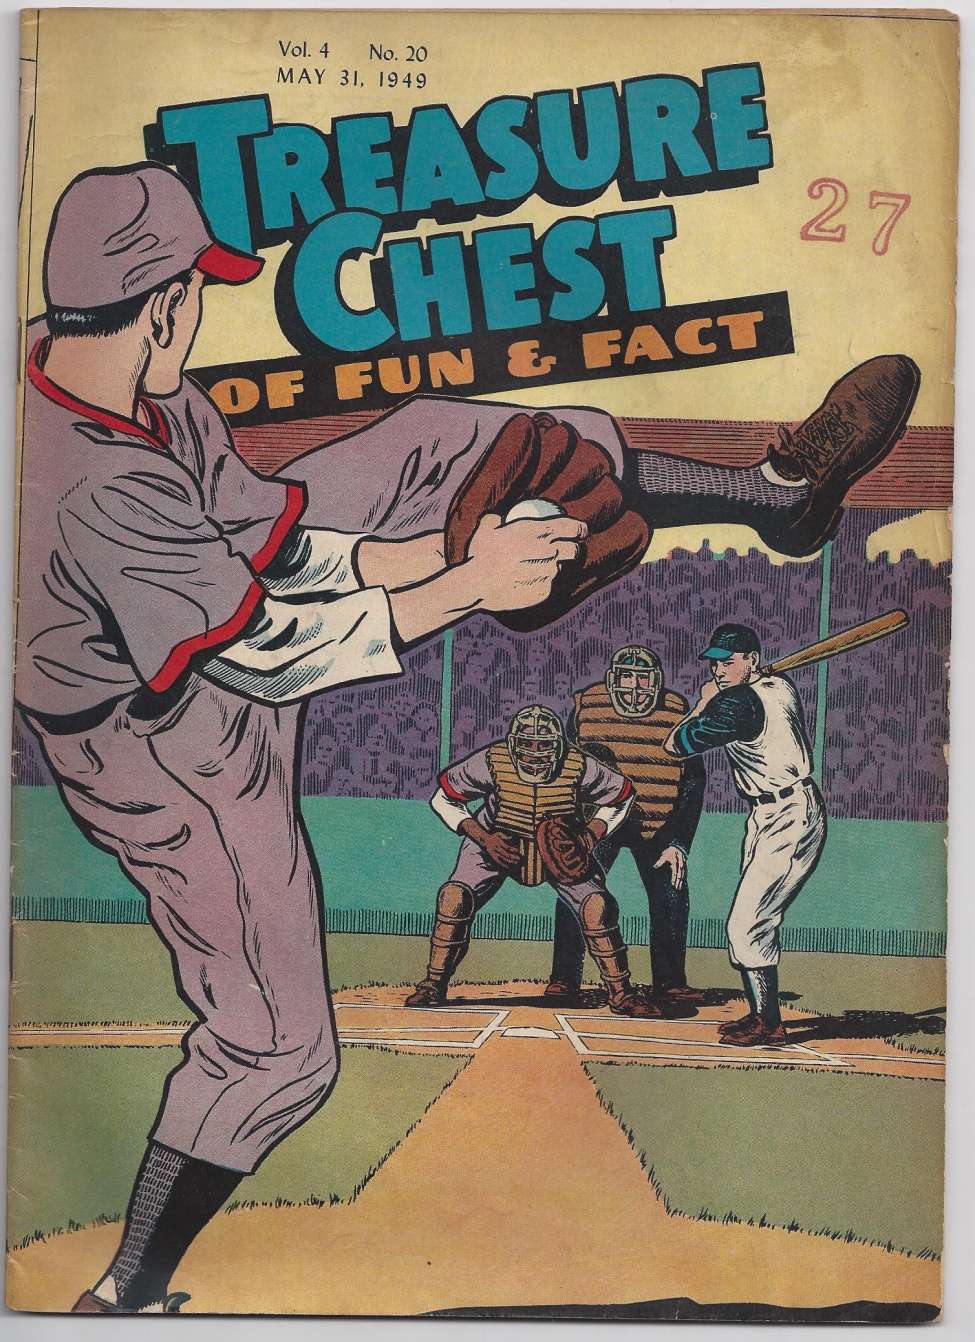 Comic Book Cover For Treasure Chest of Fun and Fact v4 20